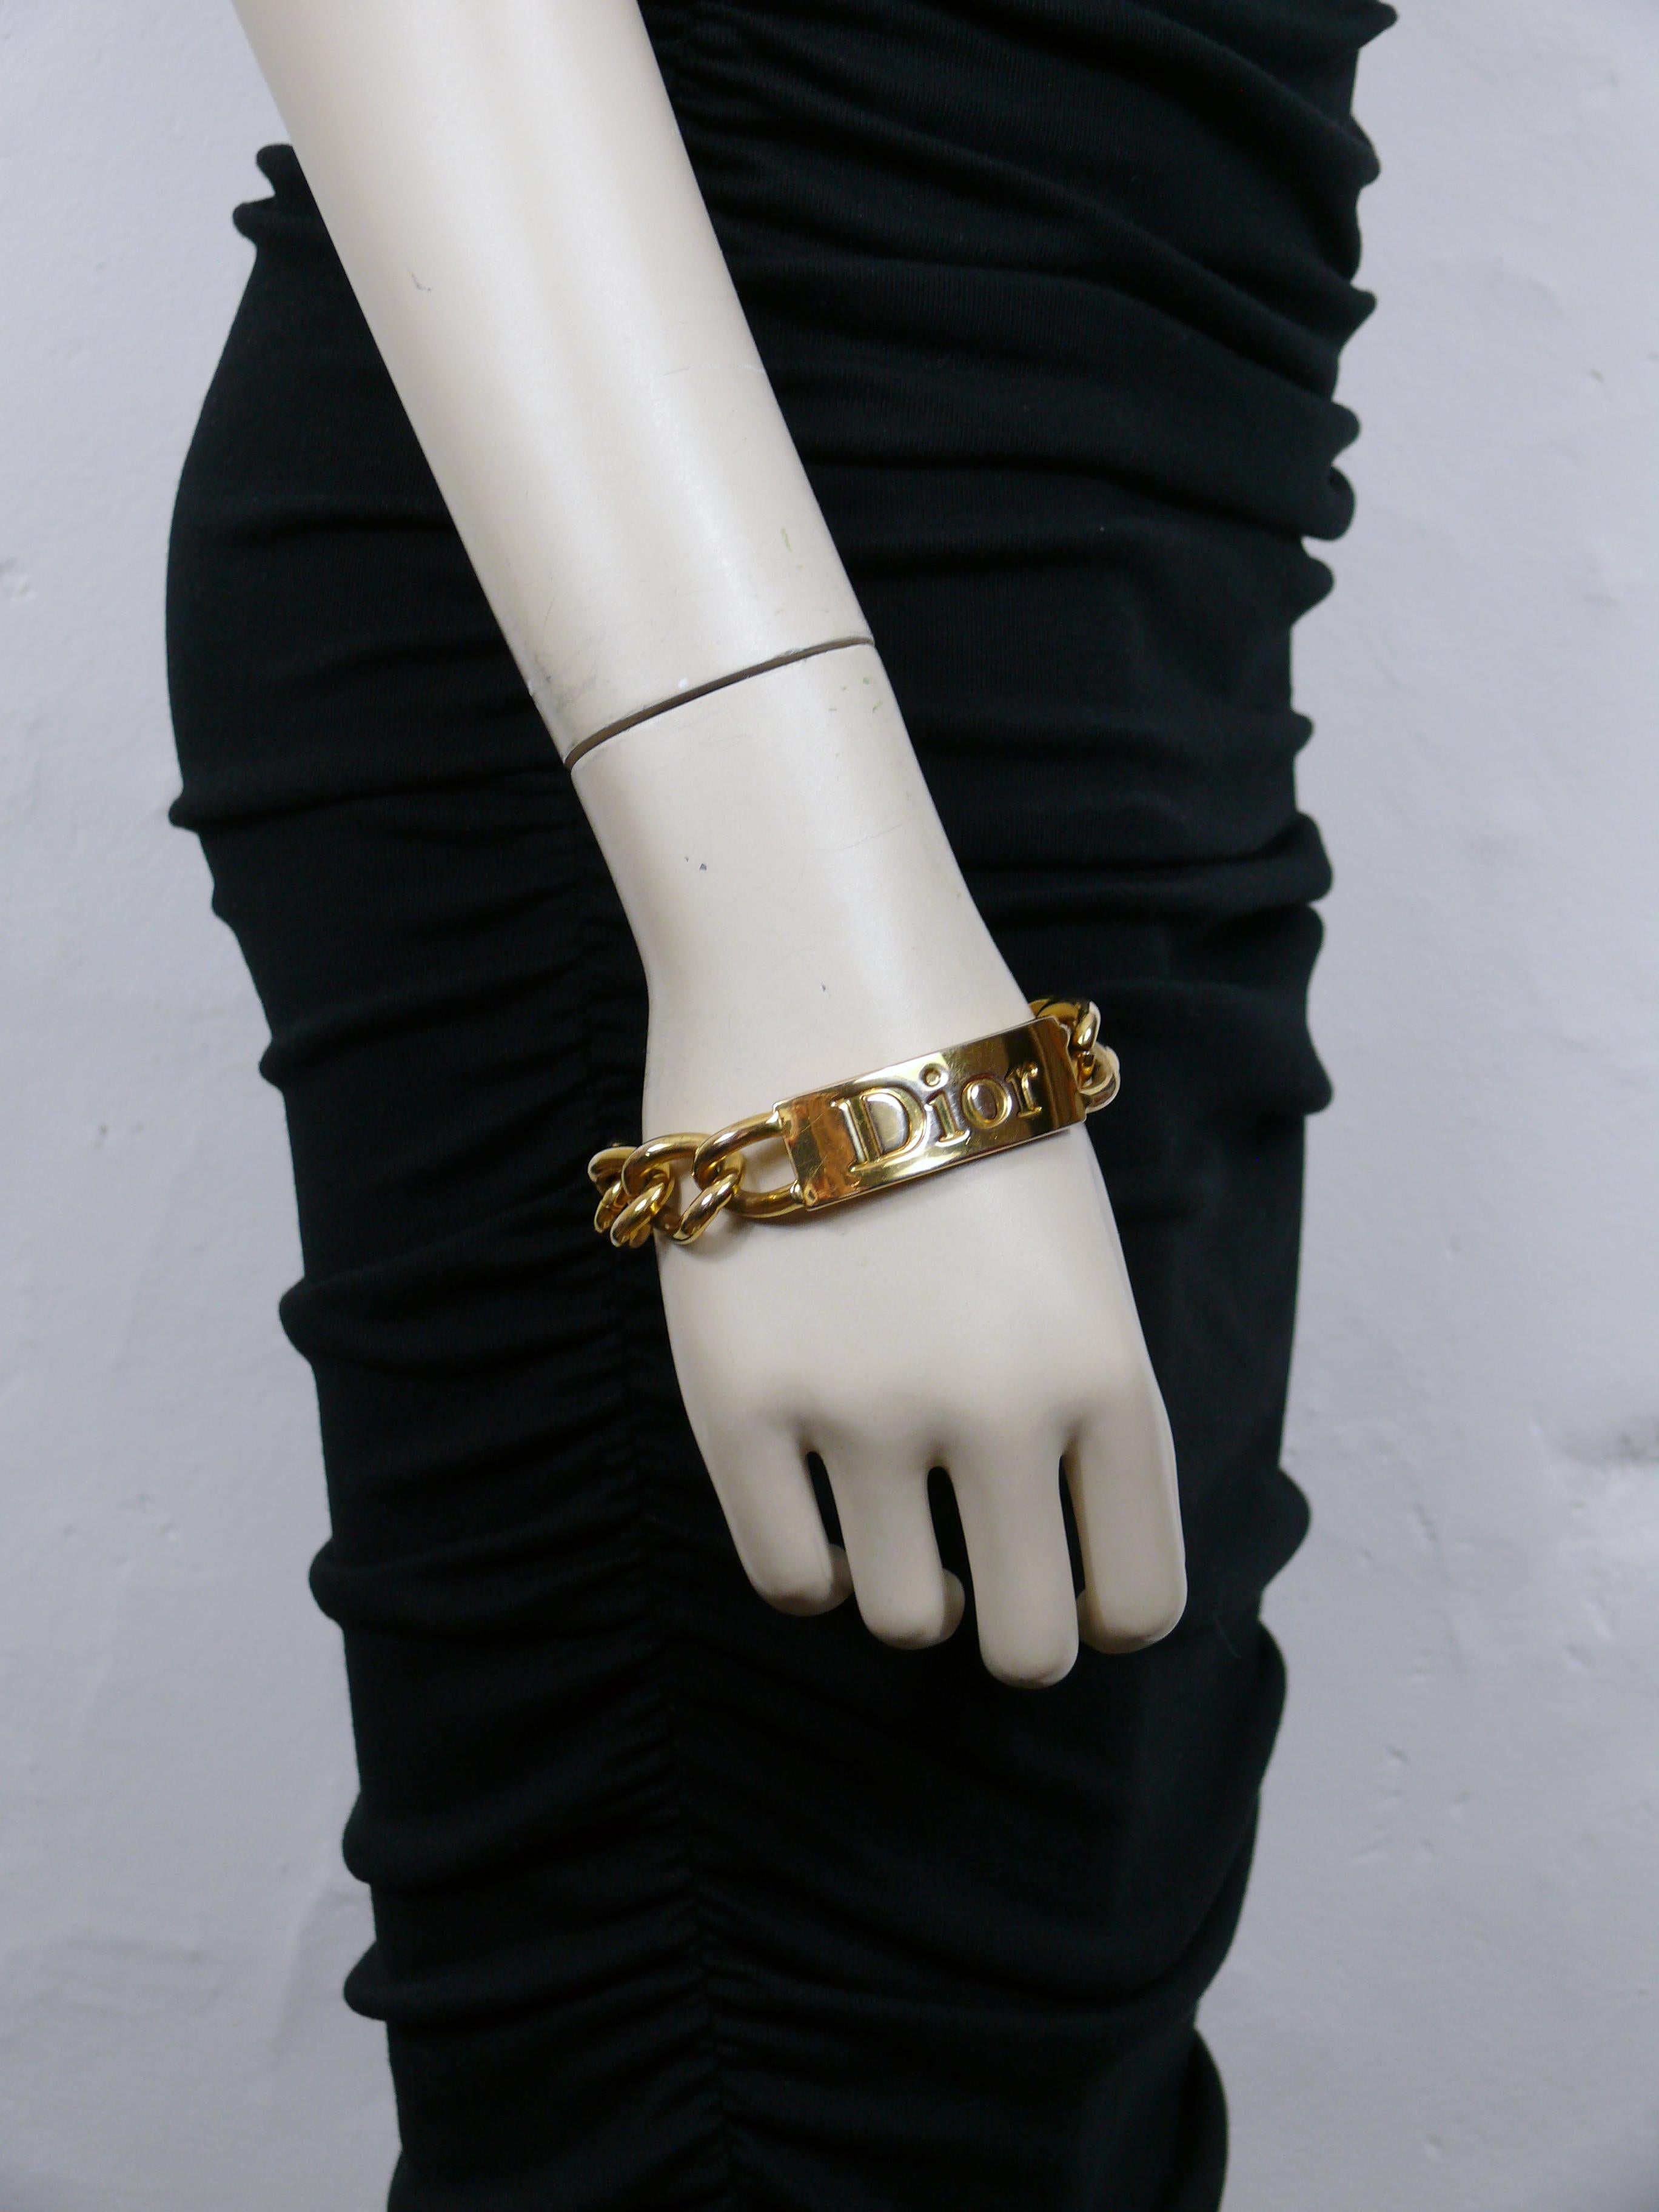 CHRISTIAN DIOR by JOHN GALLIANO gold tone bracelet featuring curb links and ID tag embossed DIOR.

Lobster clasp closure.

Embossed DIOR ©.

Indicative measurements : length approx. 20.5 cm (8.07 inches)  / link width 1.5 cm (0.59 inch).

Materials